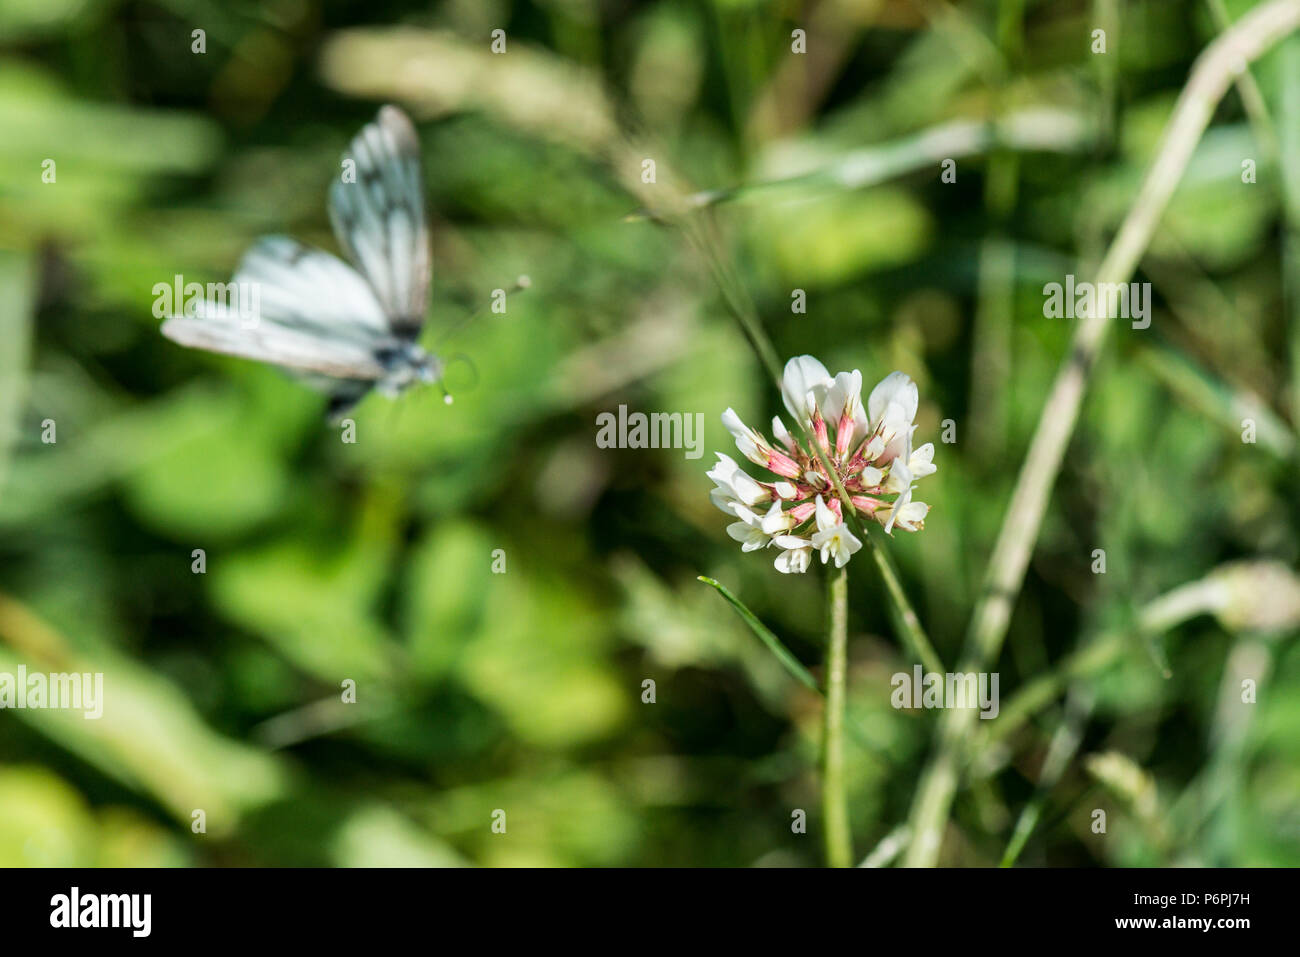 A female green-veined white butterfly (Pieris napi) on the flower of a white clover (Trifolium repens) Stock Photo